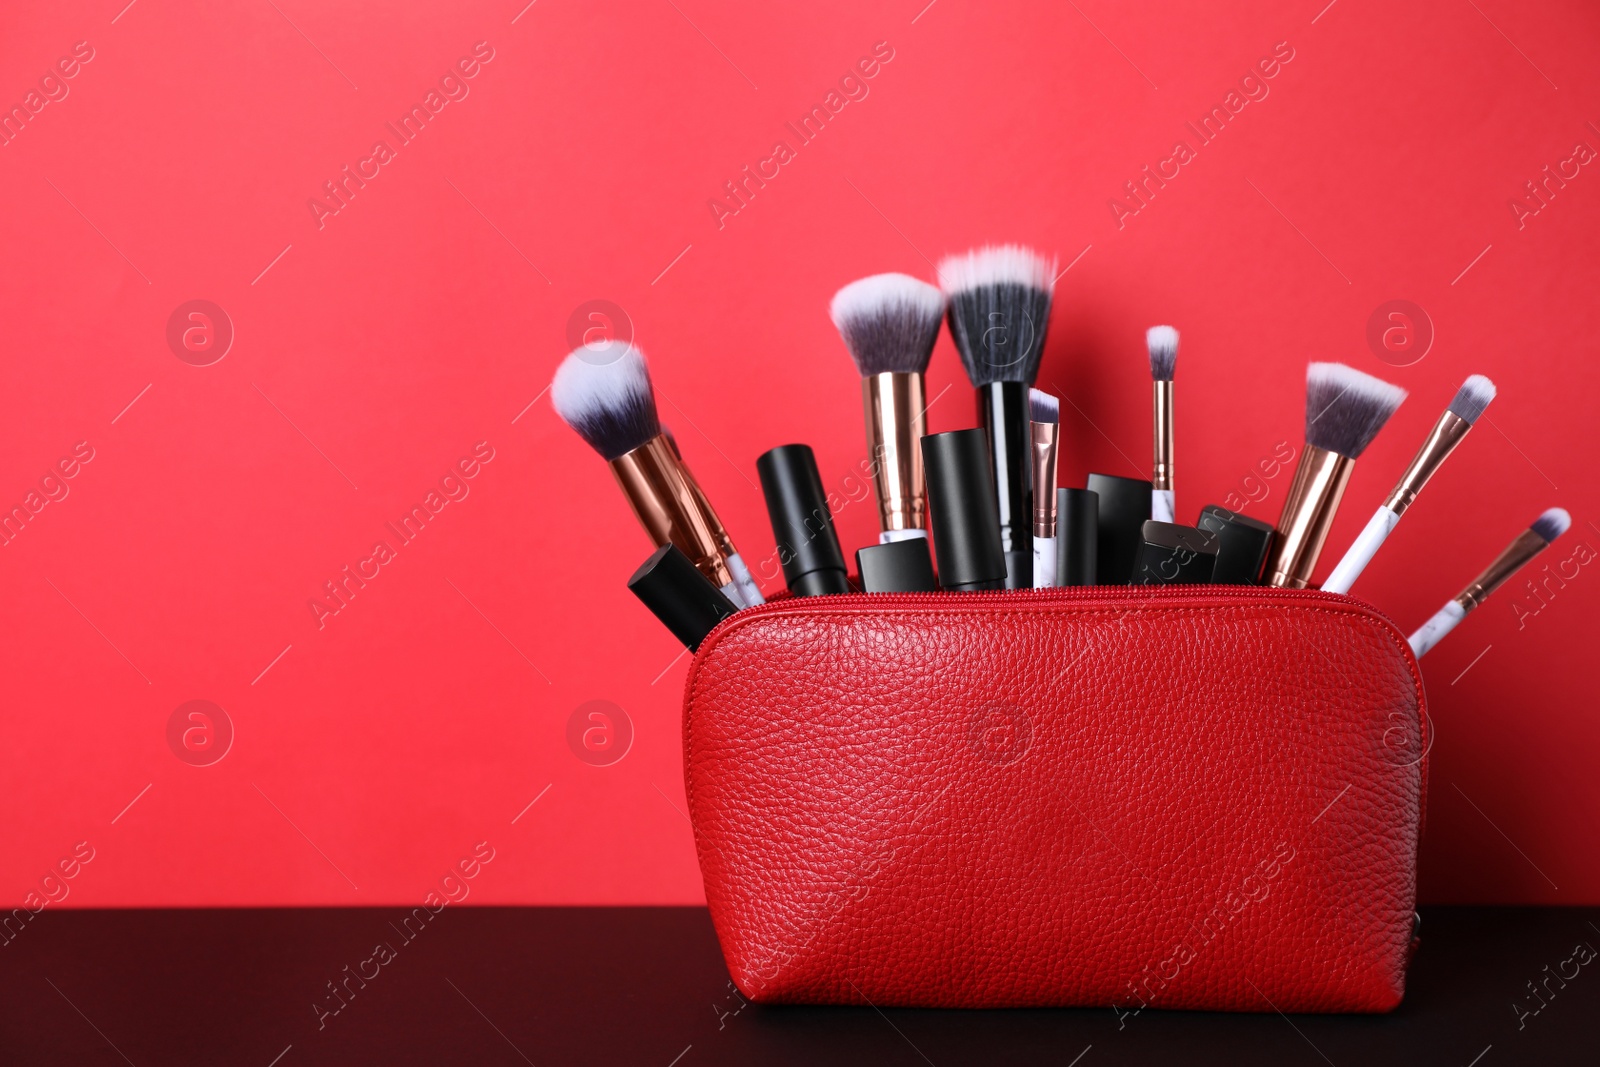 Photo of Bag with makeup brushes and cosmetic products on black table against red background. Space for text